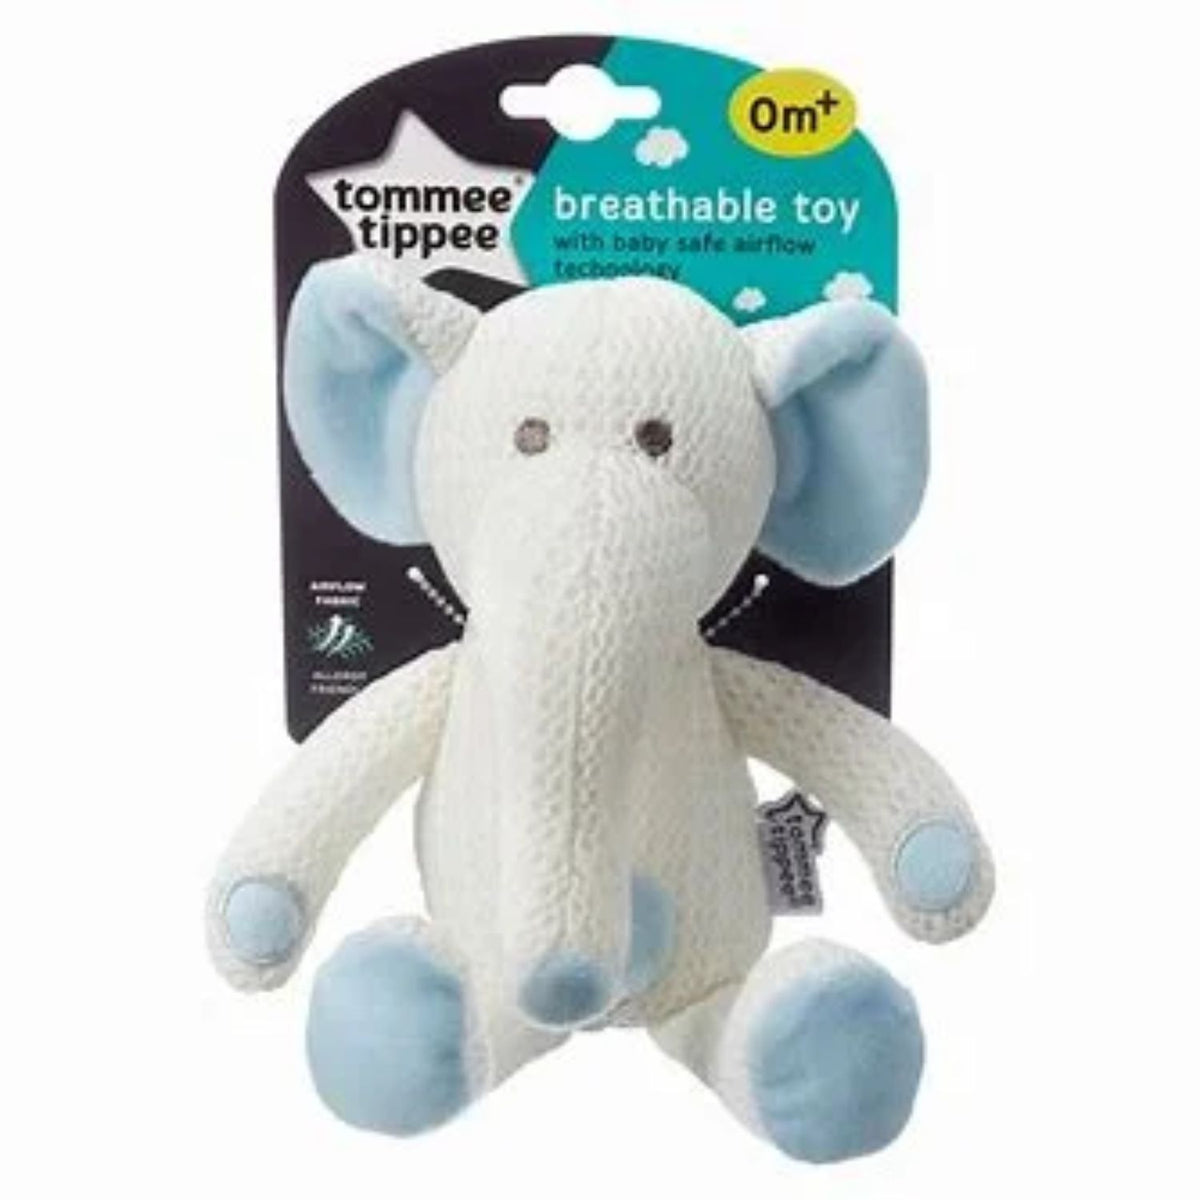 Tommee Tippee Breathable Soft Toy for Baby with Airflow Technology, Hypoallergenic, 0m+, Eddy the Elephant